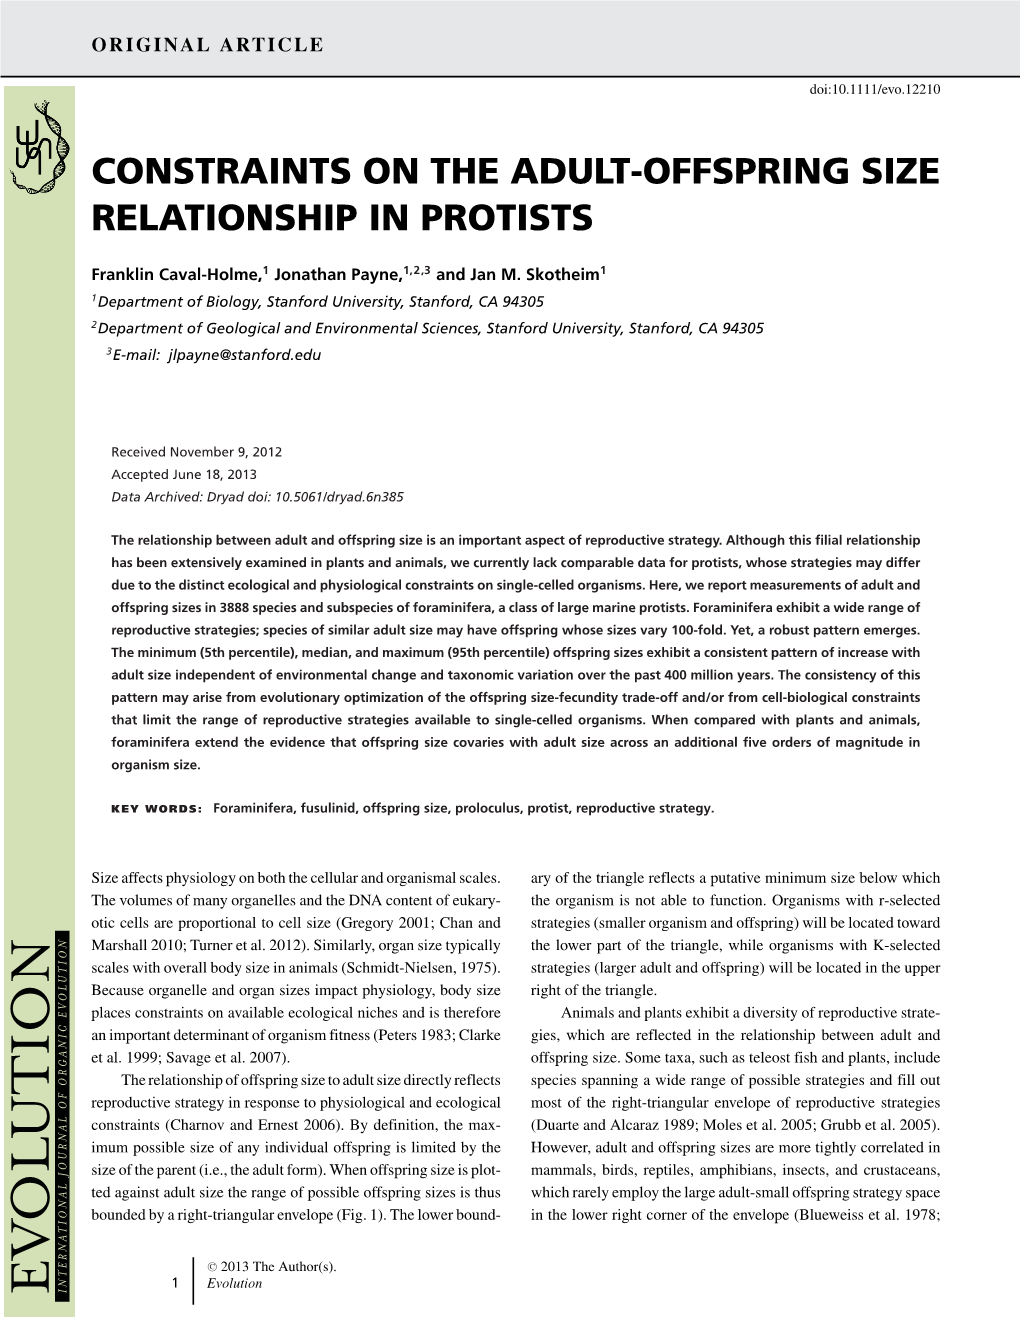 Constraints on the Adult-Offspring Size Relationship in Protists